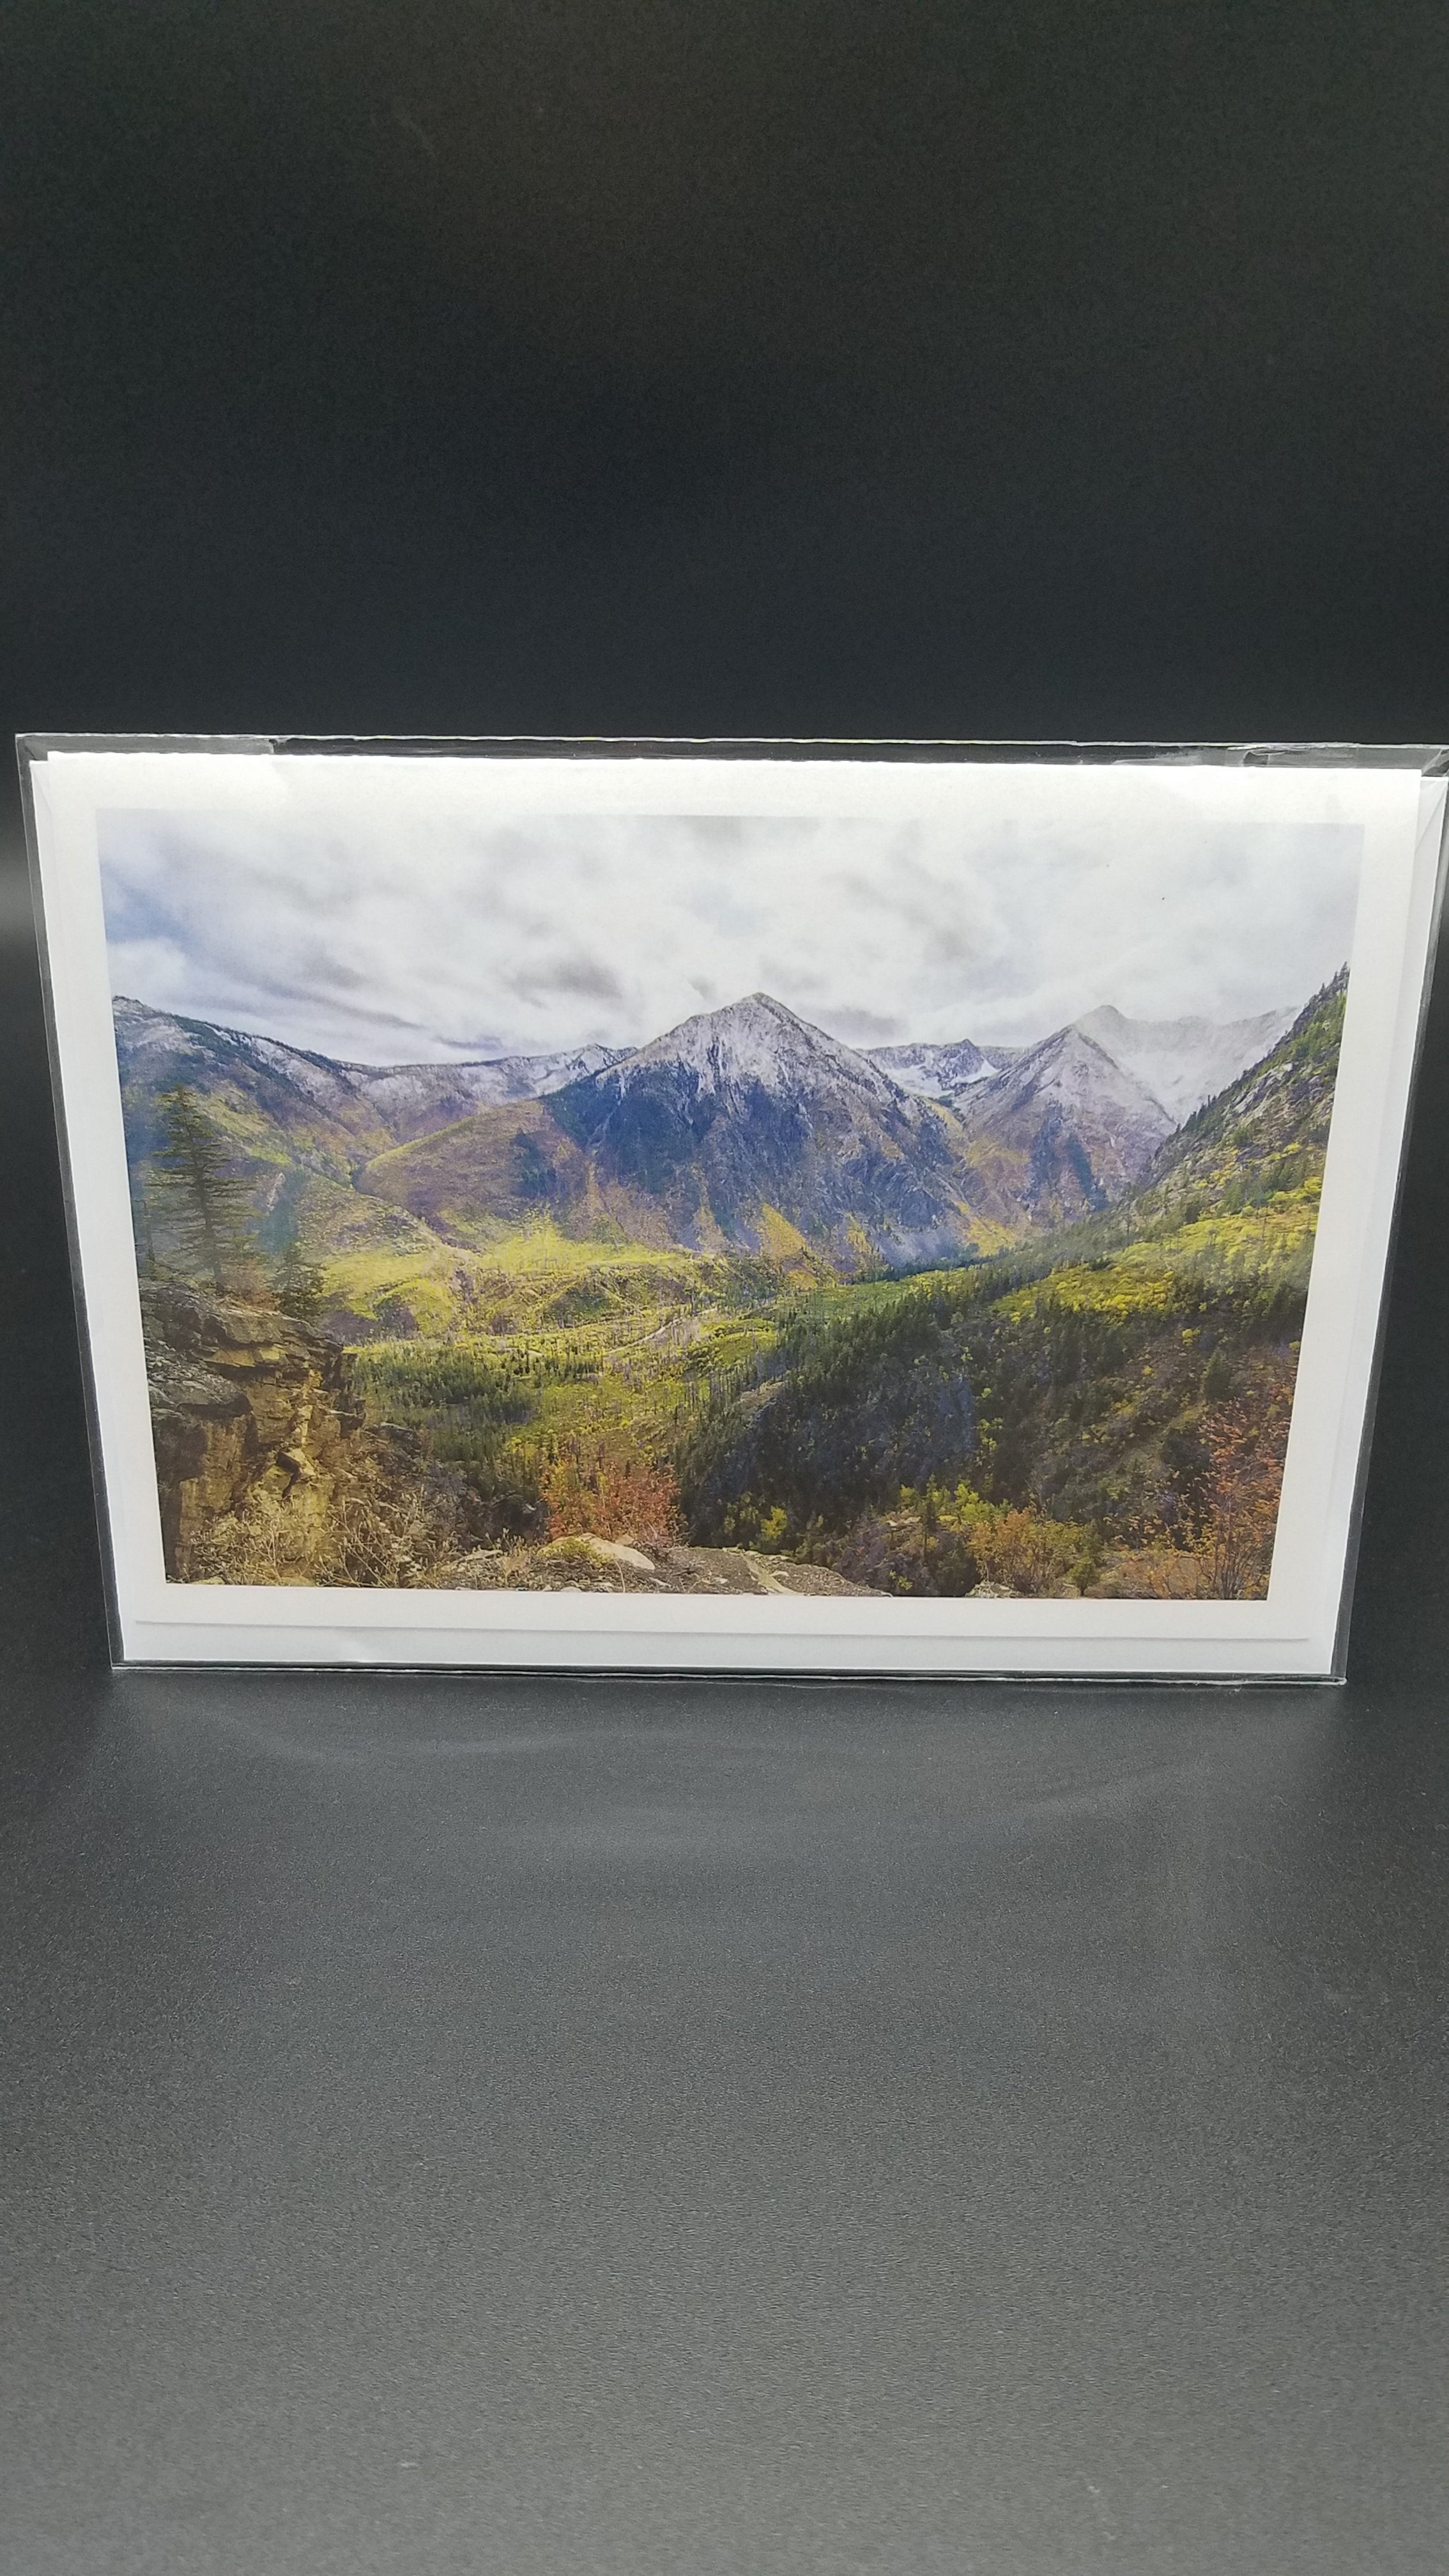 Mitchell Image - Notecards